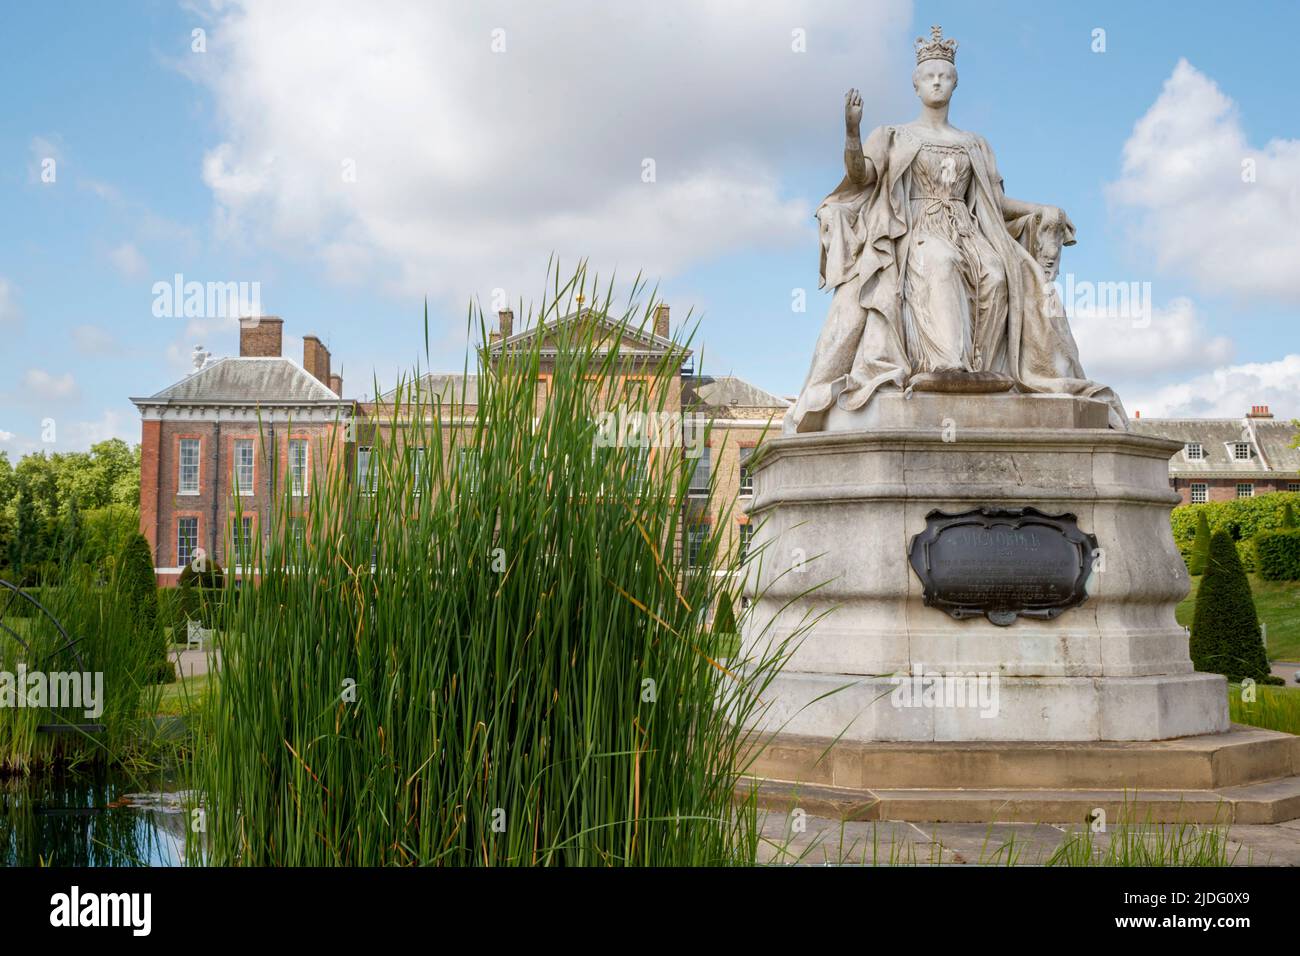 Queen Victoria Statue in Kensington Palace, Kensington Gardens,London, England, United Kingdom on Thursday, May 19, 2022. Stock Photo